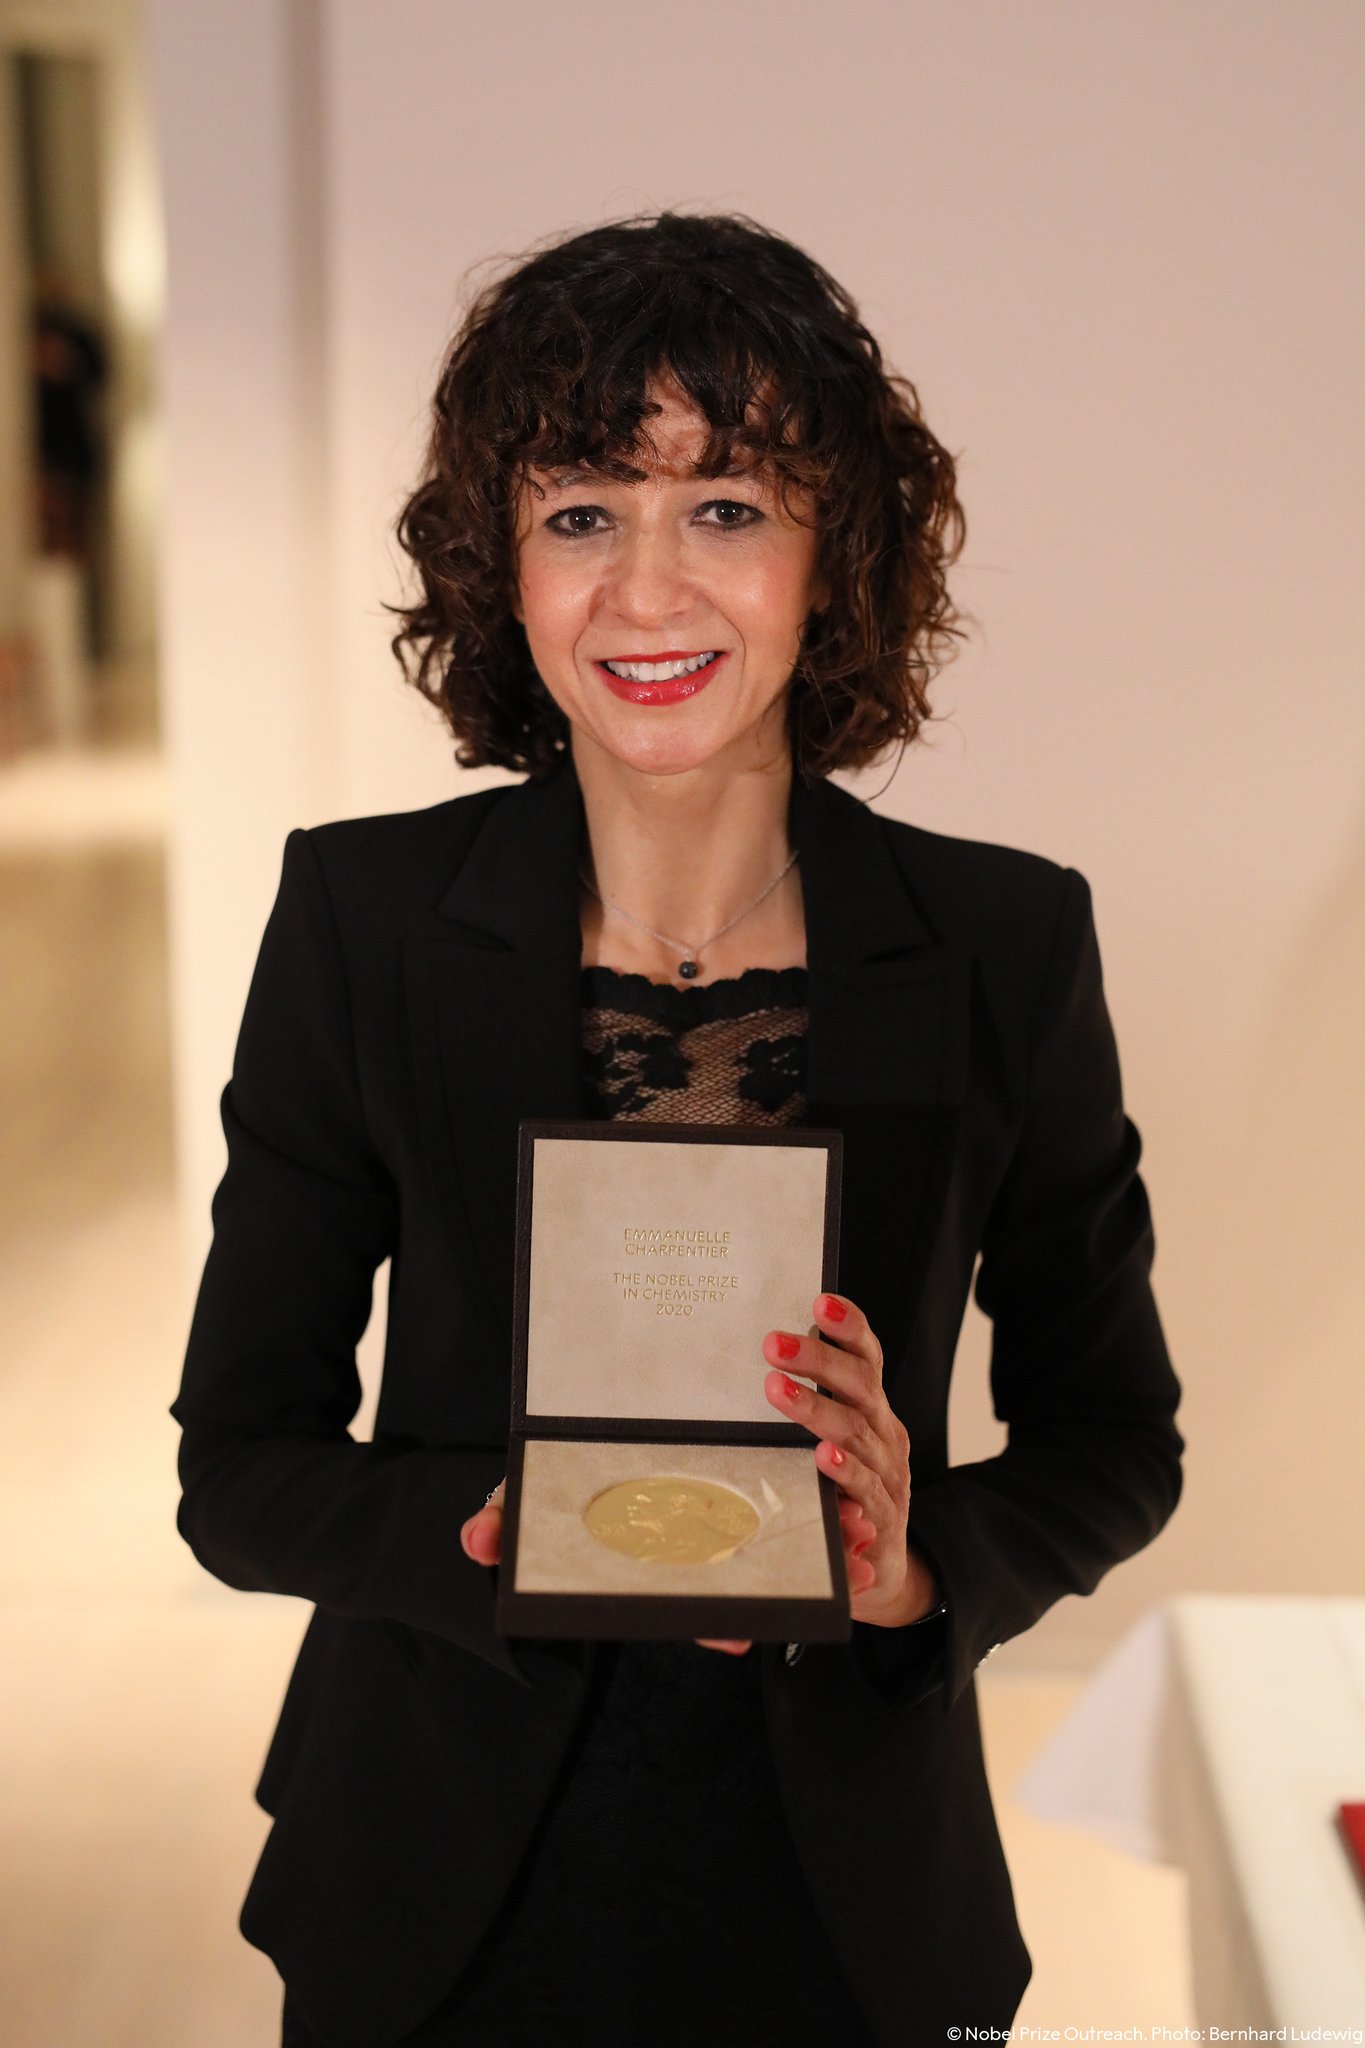 The Nobel Prize Our Second Nobel Prize Medal And Diploma Has Been Delivered Emmanuelle Charpentier Was Awarded The Chemistry Prize For Her Work On Crispr Cas9 Used To Edit Genomes